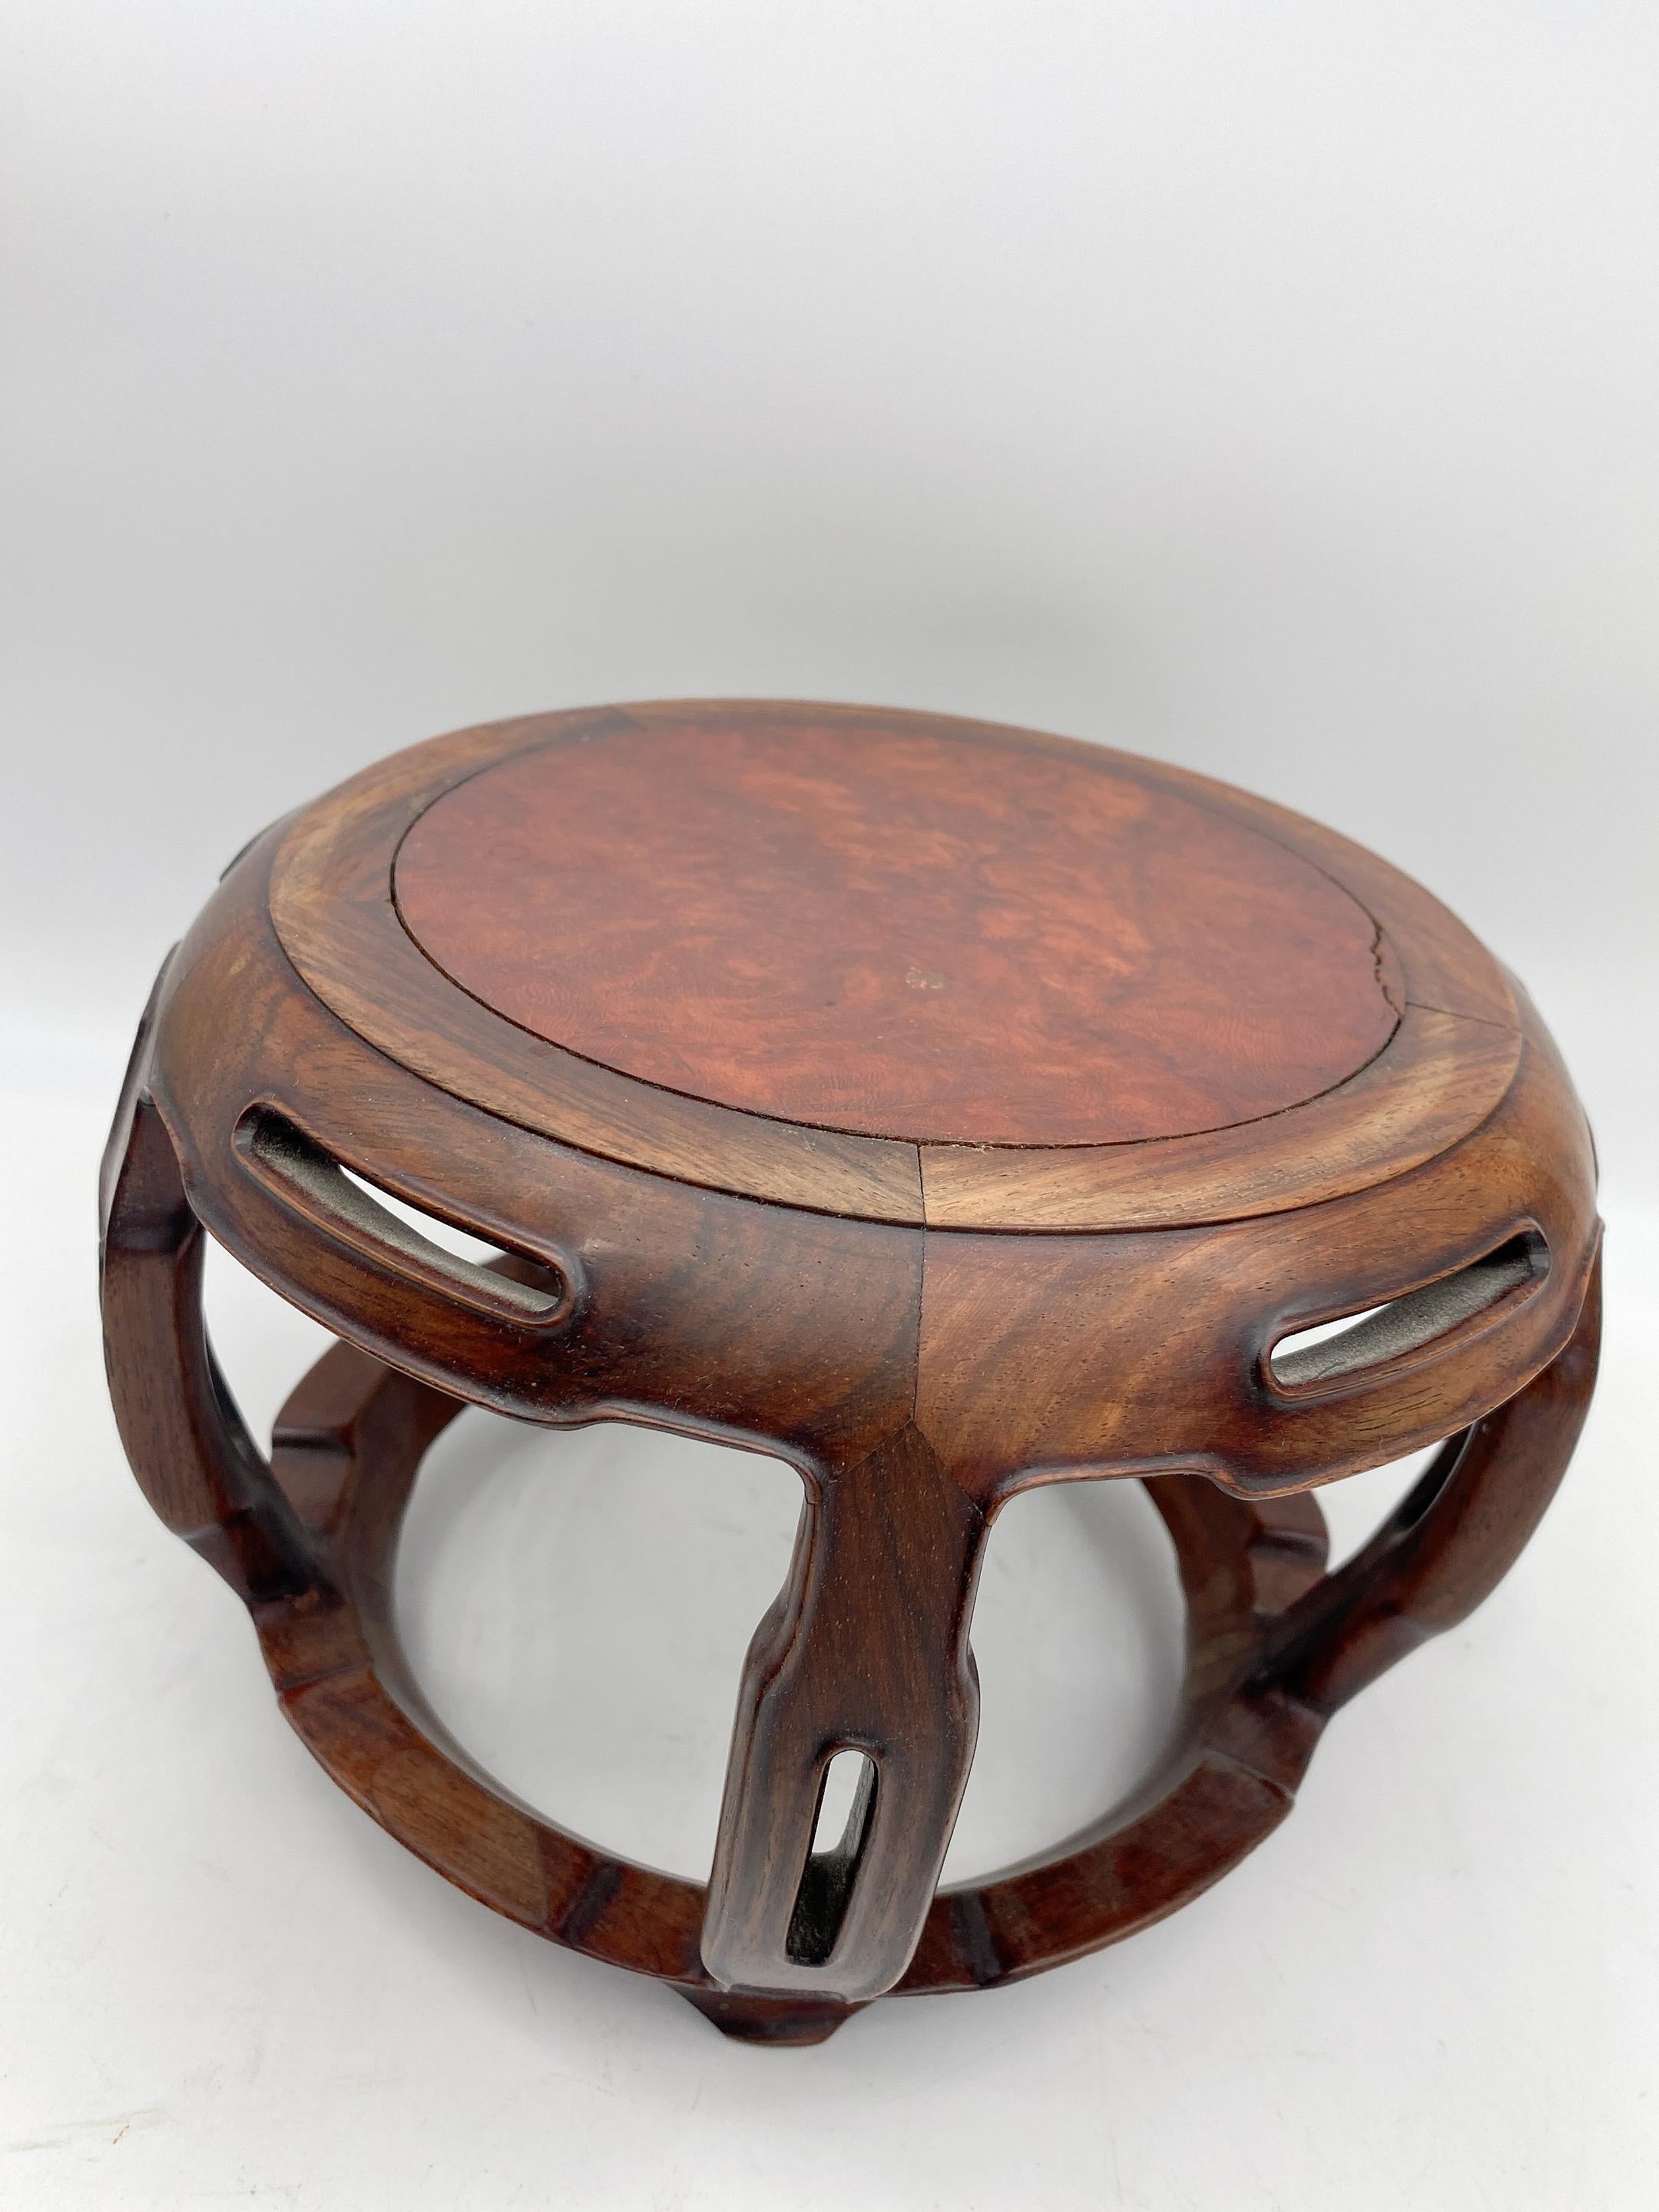 A antique Chinese heavily carved hardwood circular stand with burl wood top insert, over carved hardwood and unique 4 legs, see more pictures, measures: 9